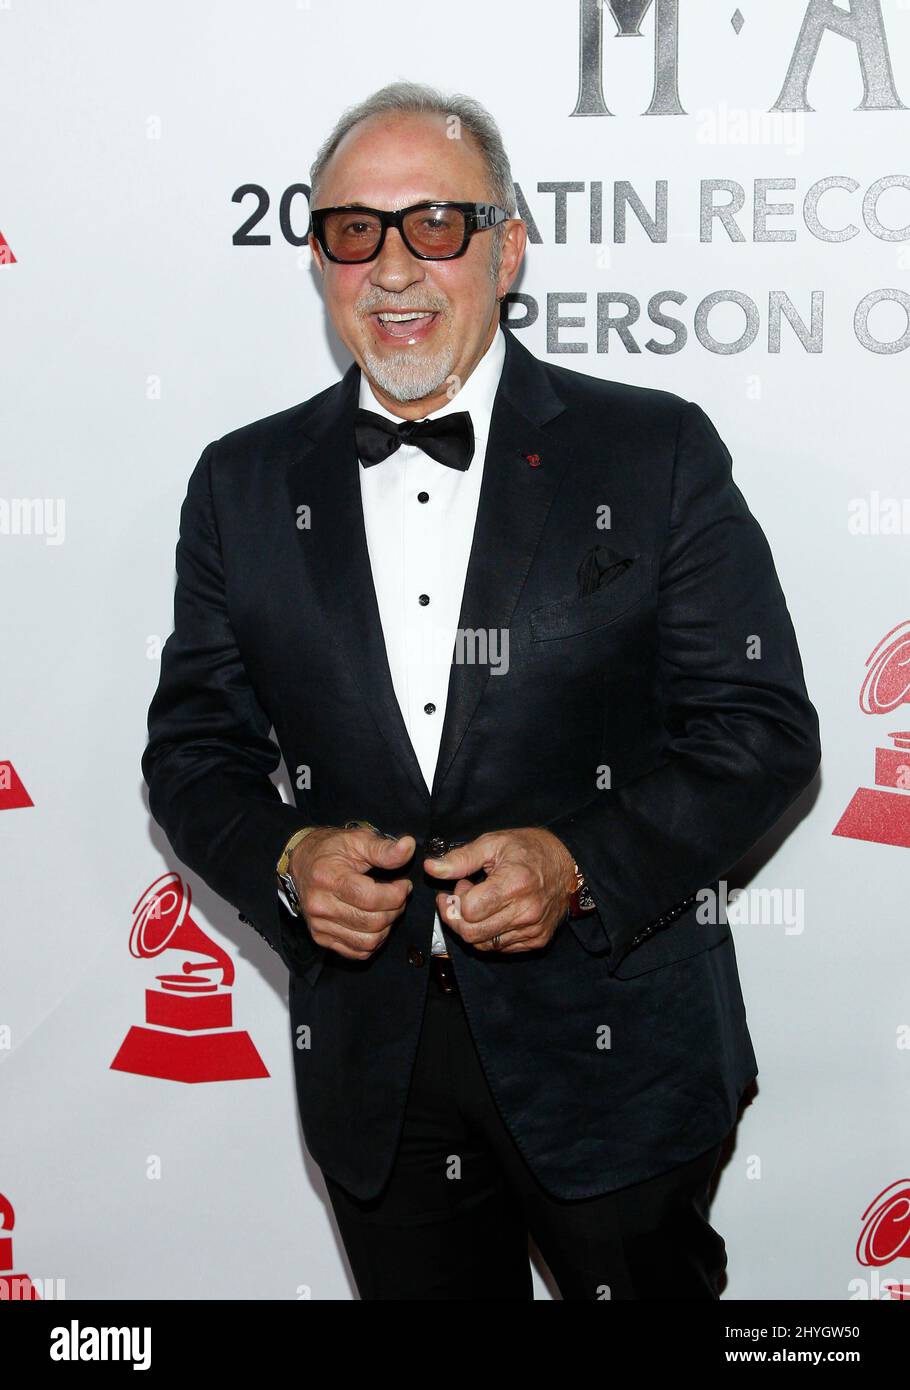 Emilio Estefan attending the 2018 Latin Recording Academy Person of The Year Gala in Las Vegas Stock Photo